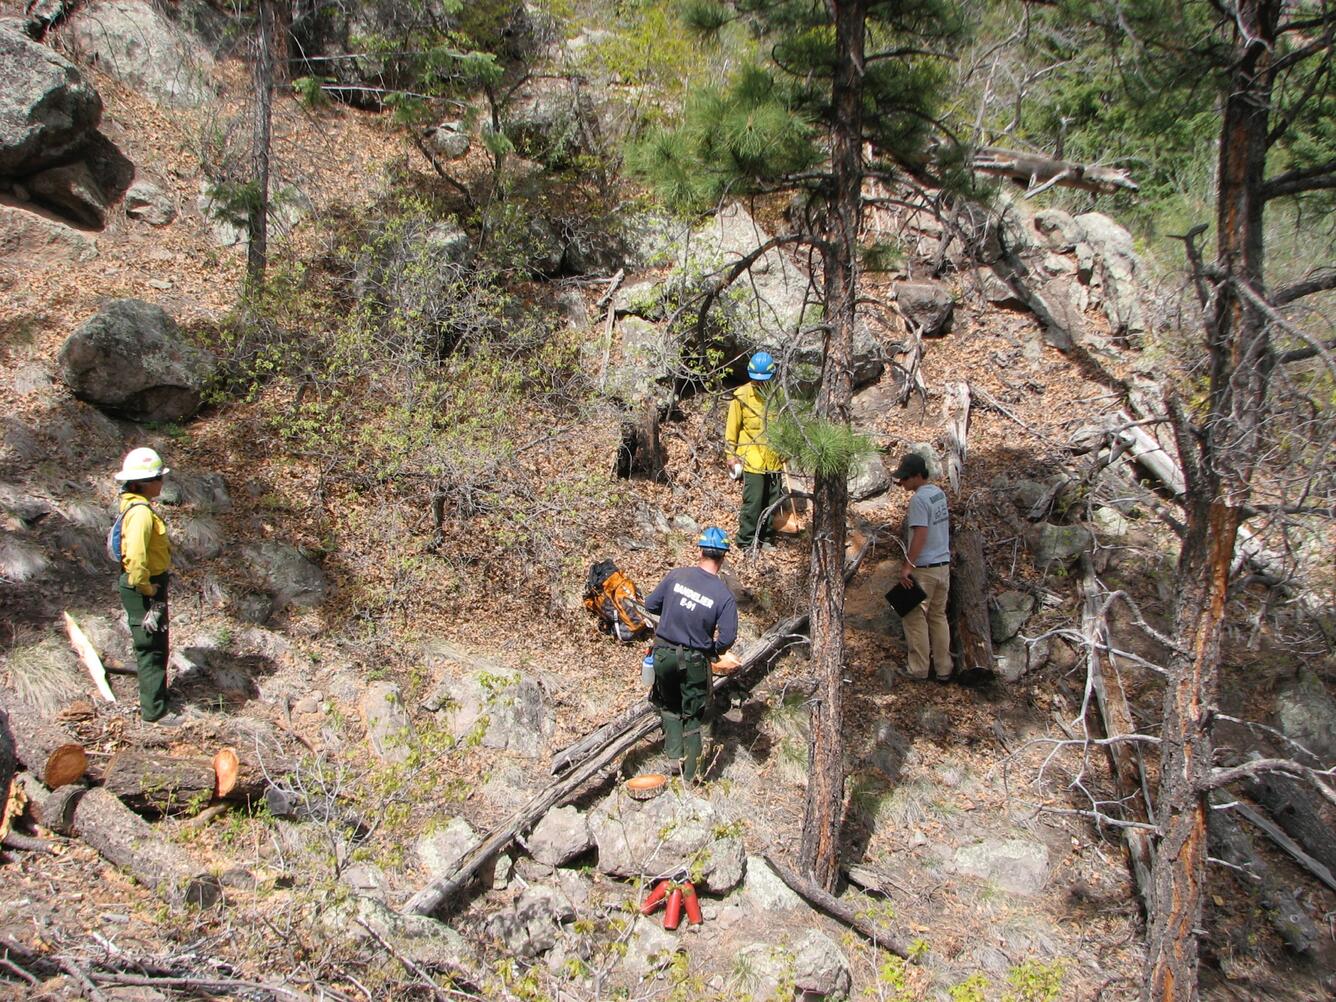 USGS scientists use chain saws to sample fire scarred wood. 